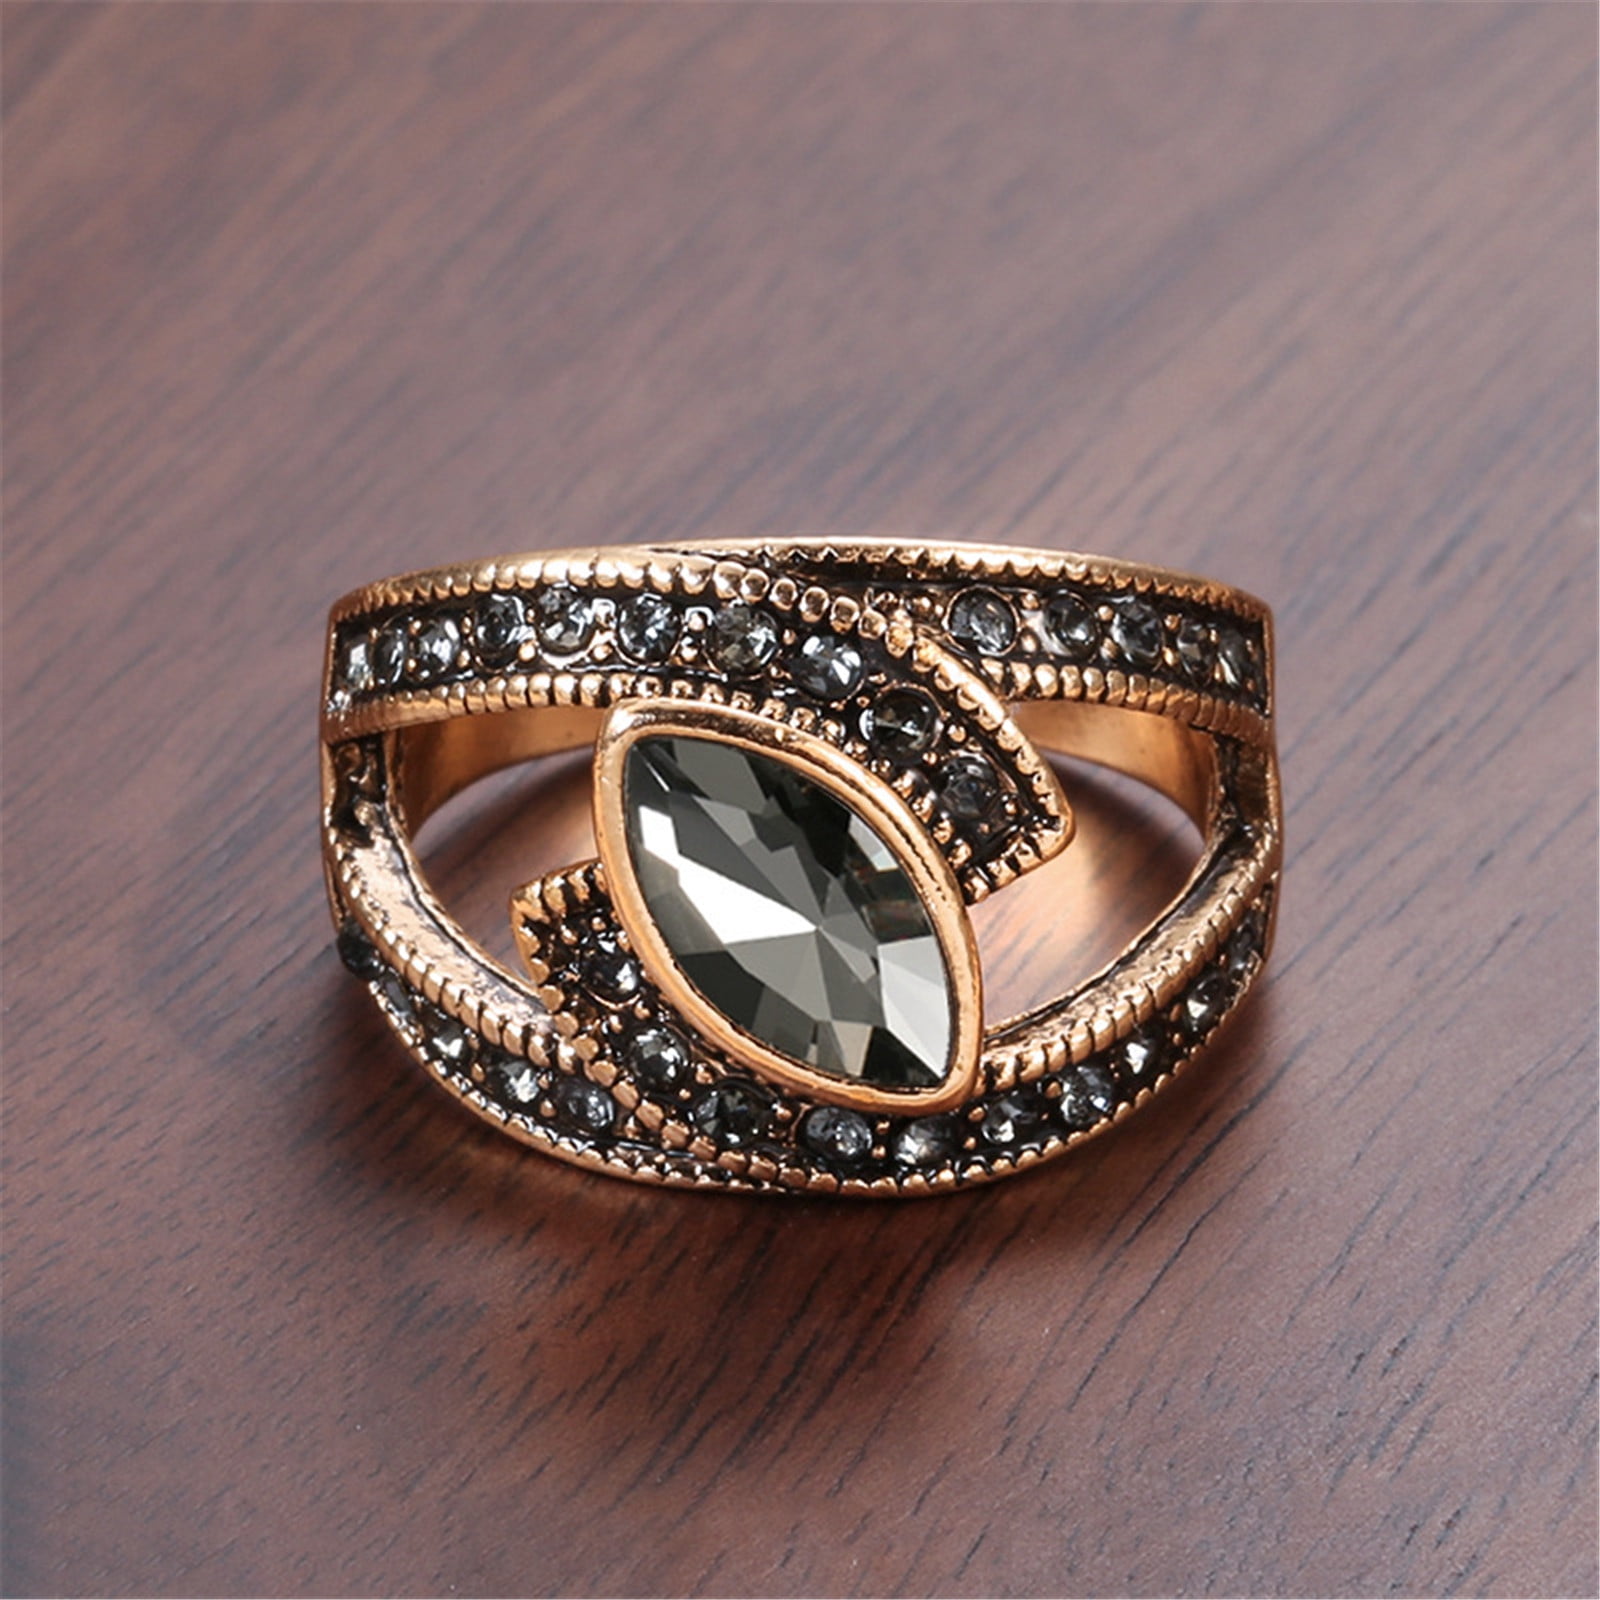 11 Online Shops For Vintage Jewelry And Engagement Rings - The Good Trade